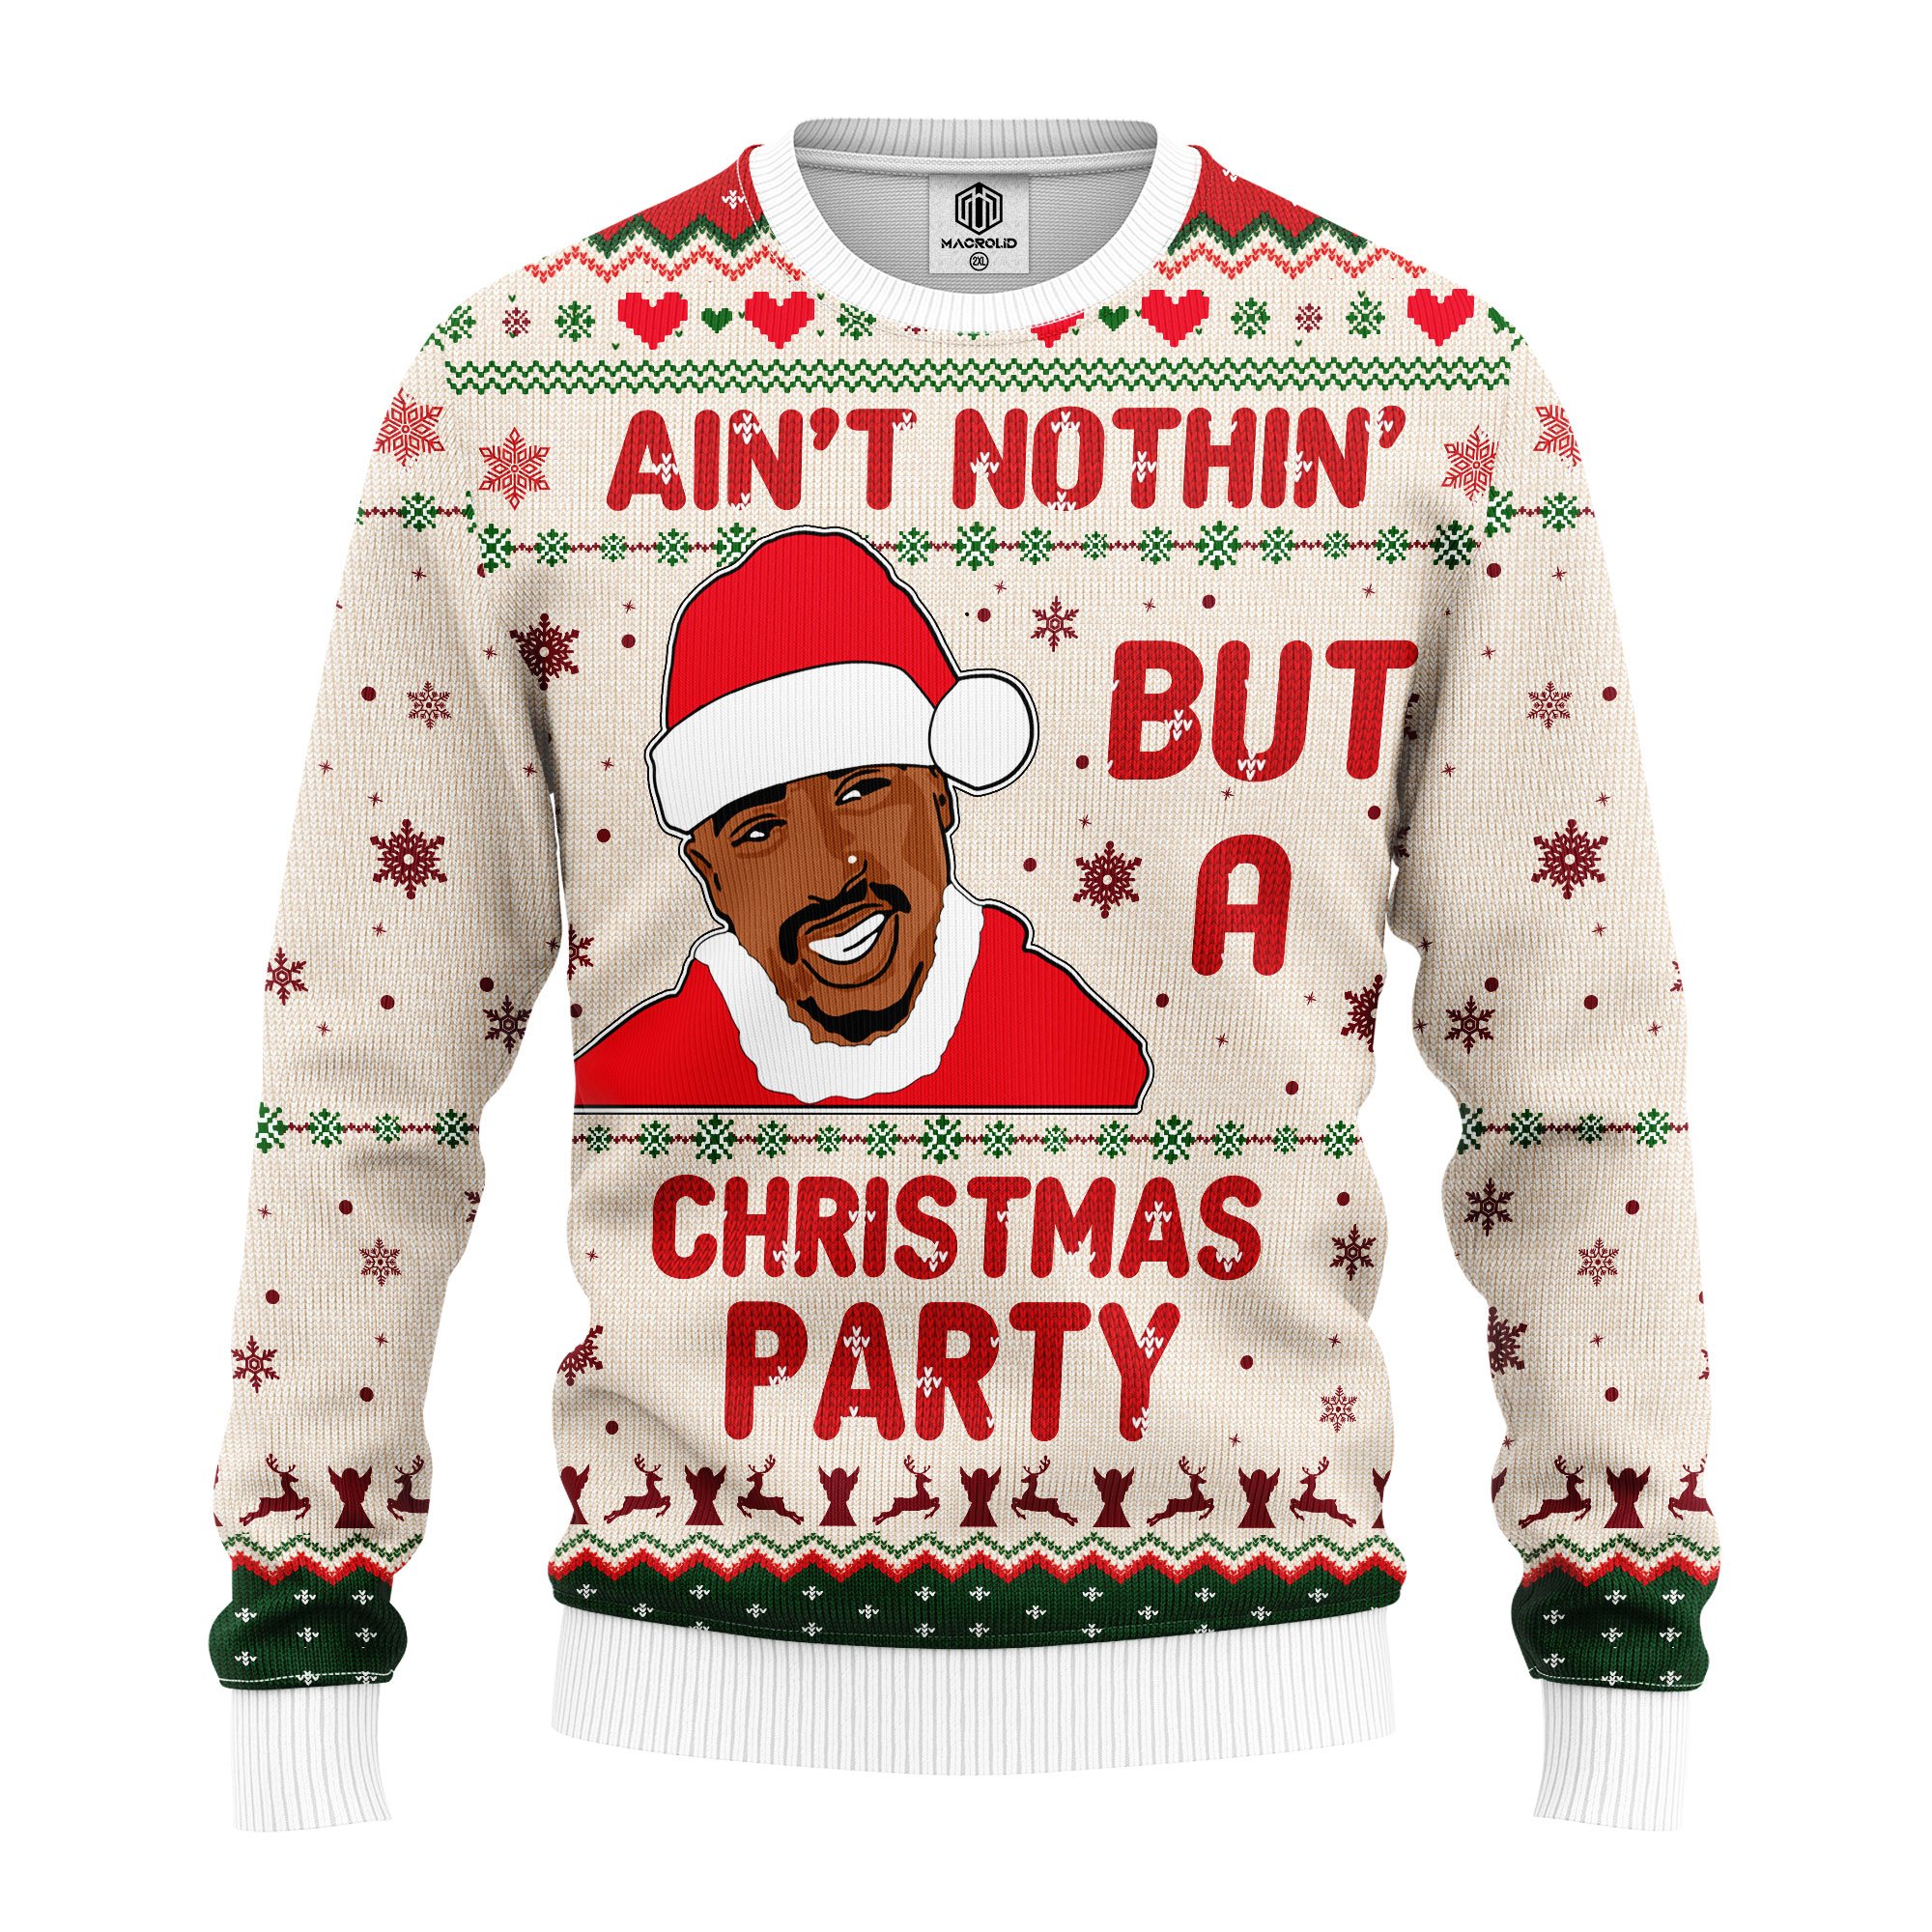 Ain't nothing but a christmas party sweater